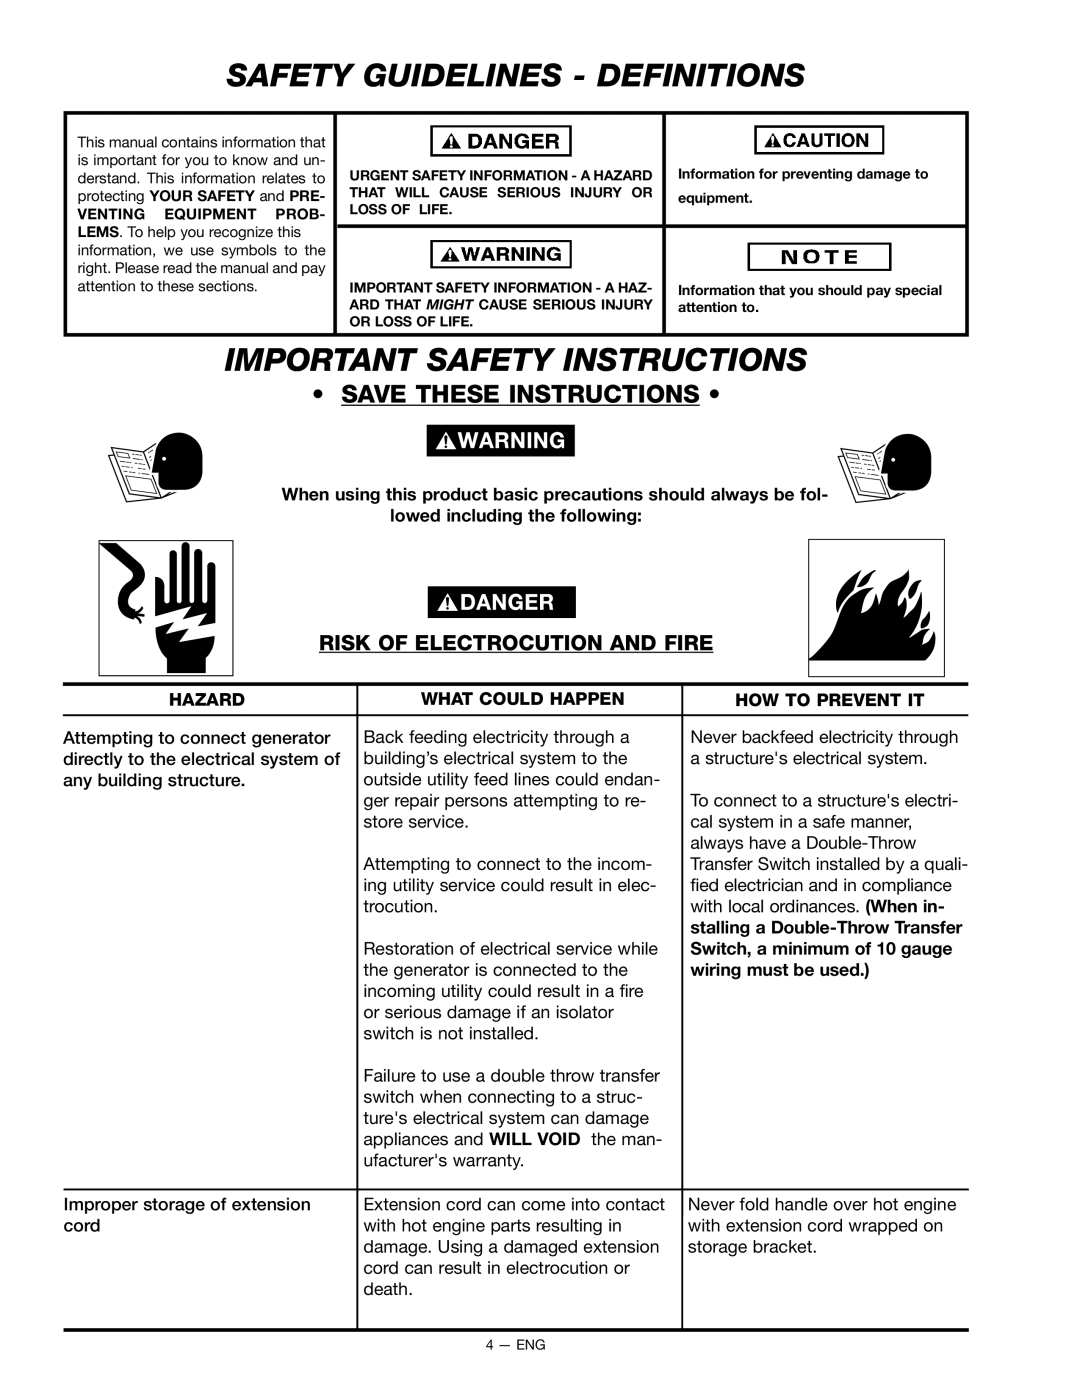 Porter-Cable BSI550 Safety Guidelines - Definitions, Important Safety Instructions, Save These Instructions, Hazard 